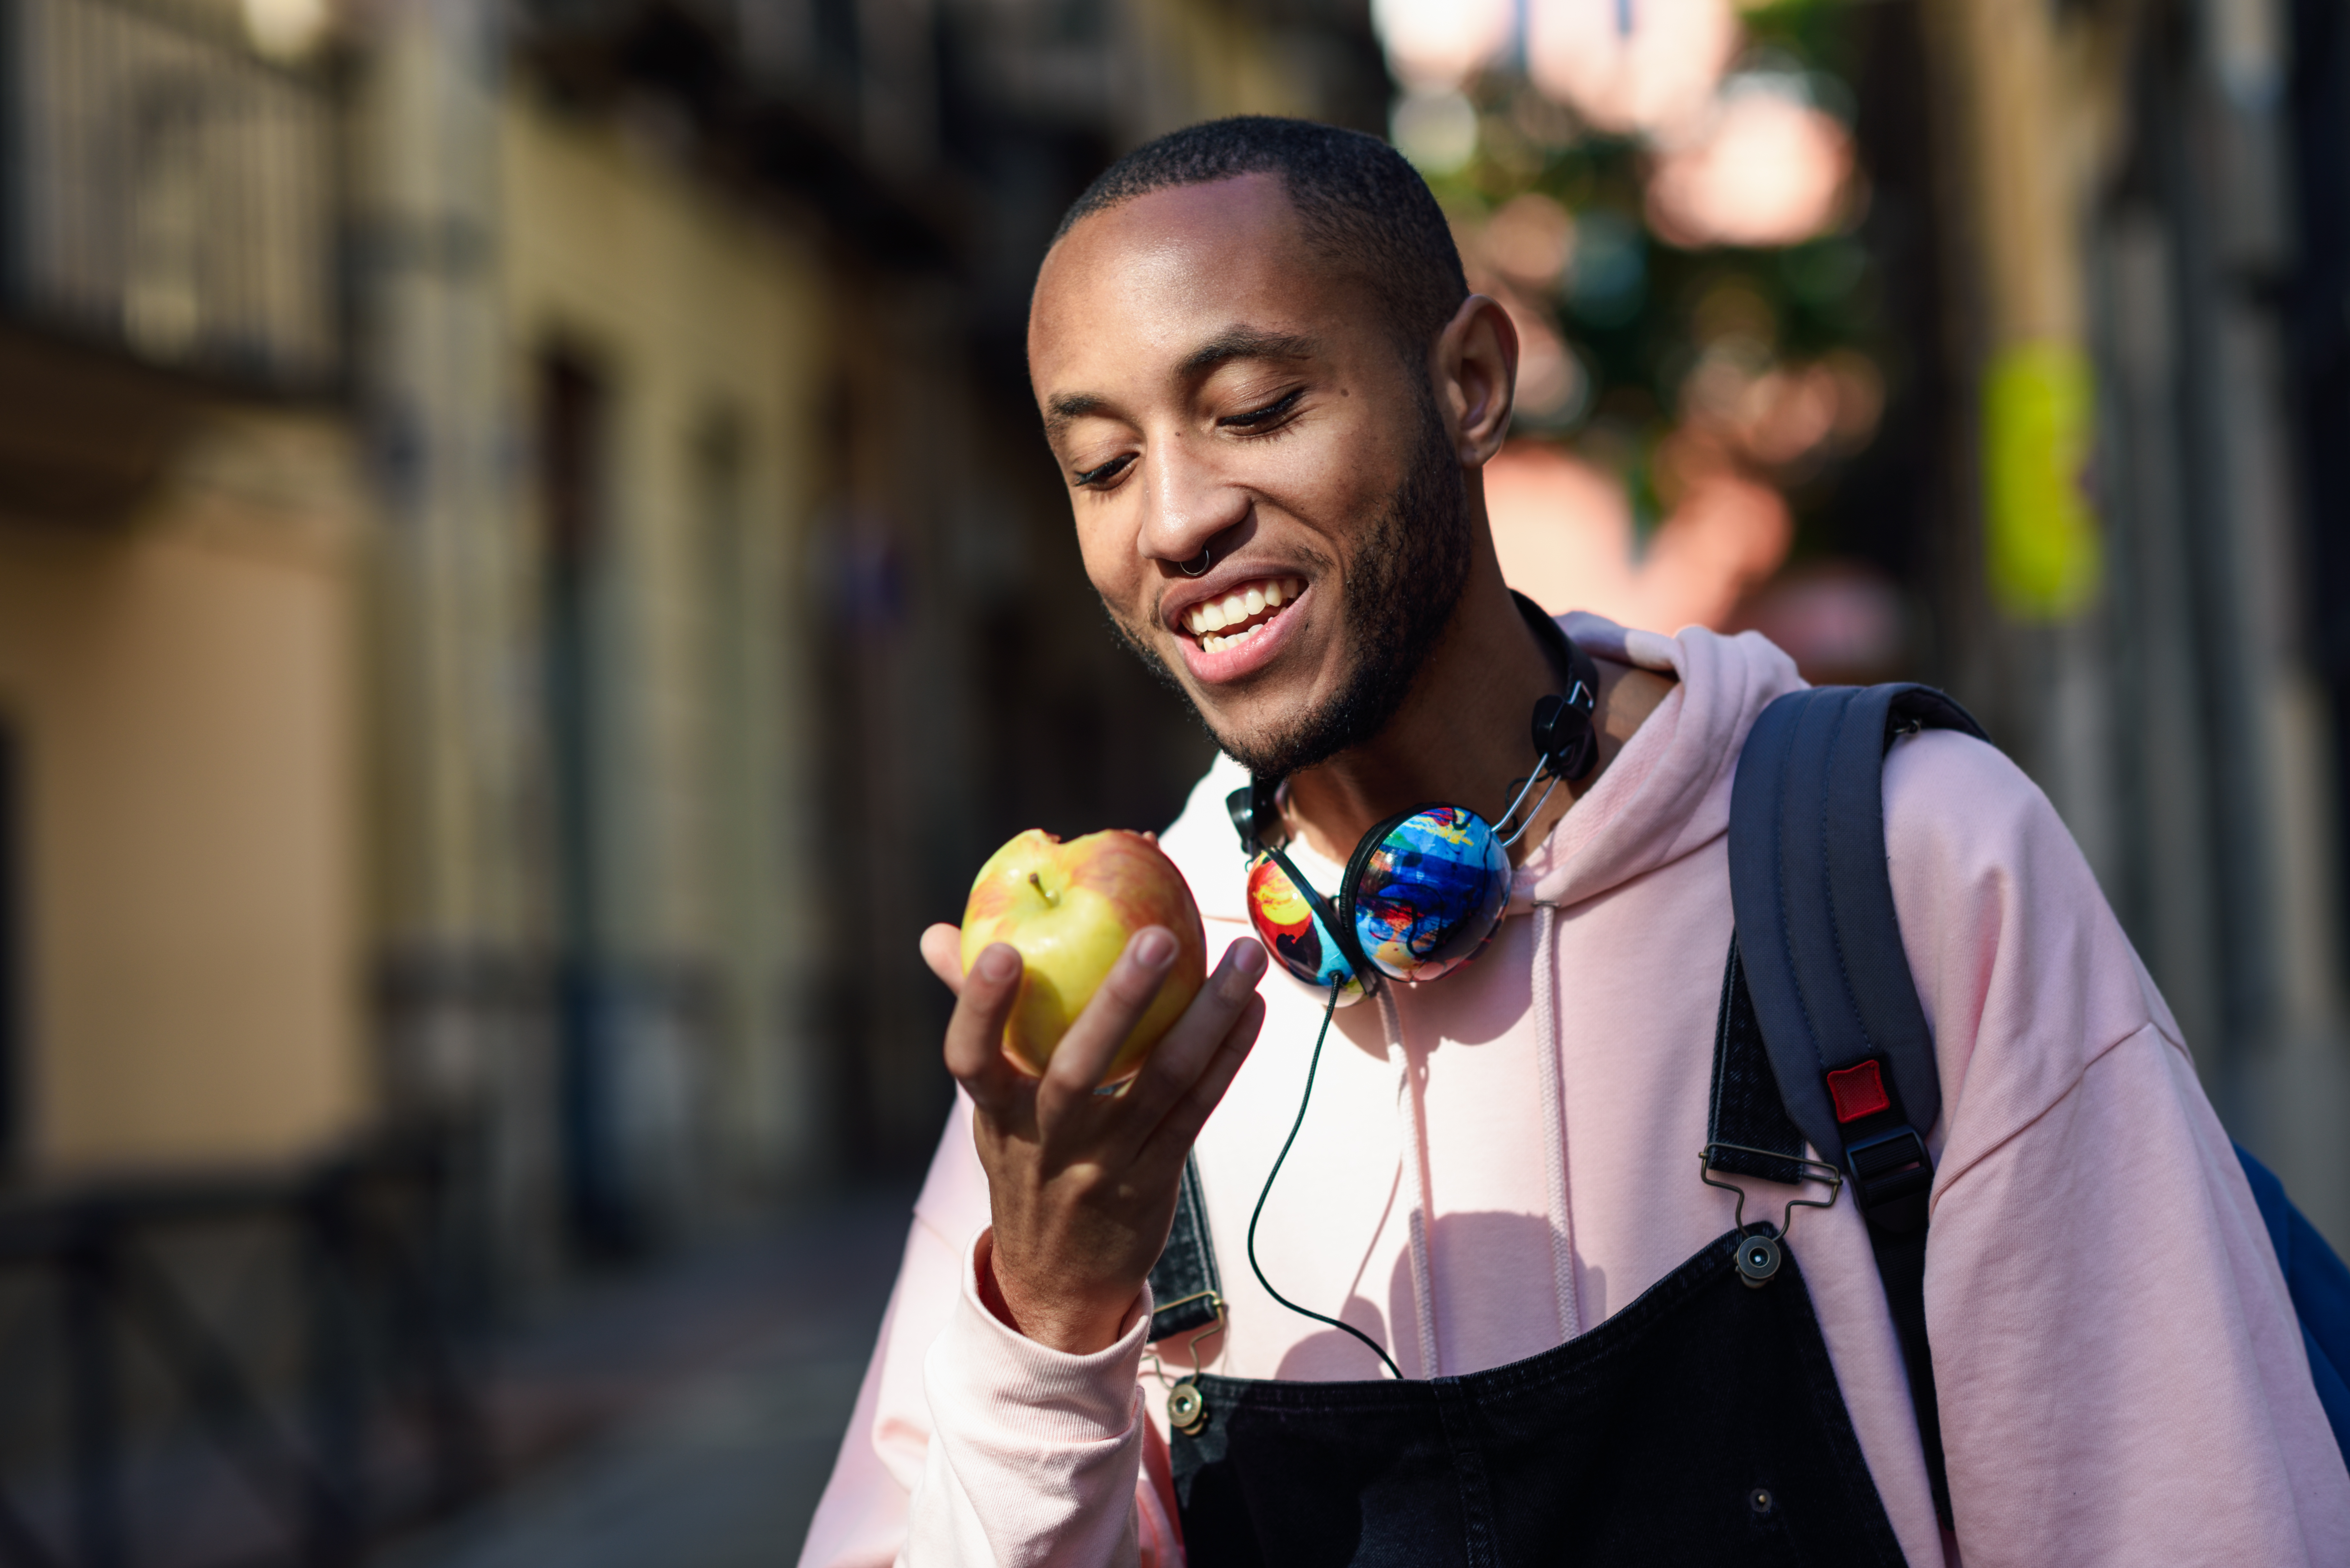 young black man eating an apple walking down the street.